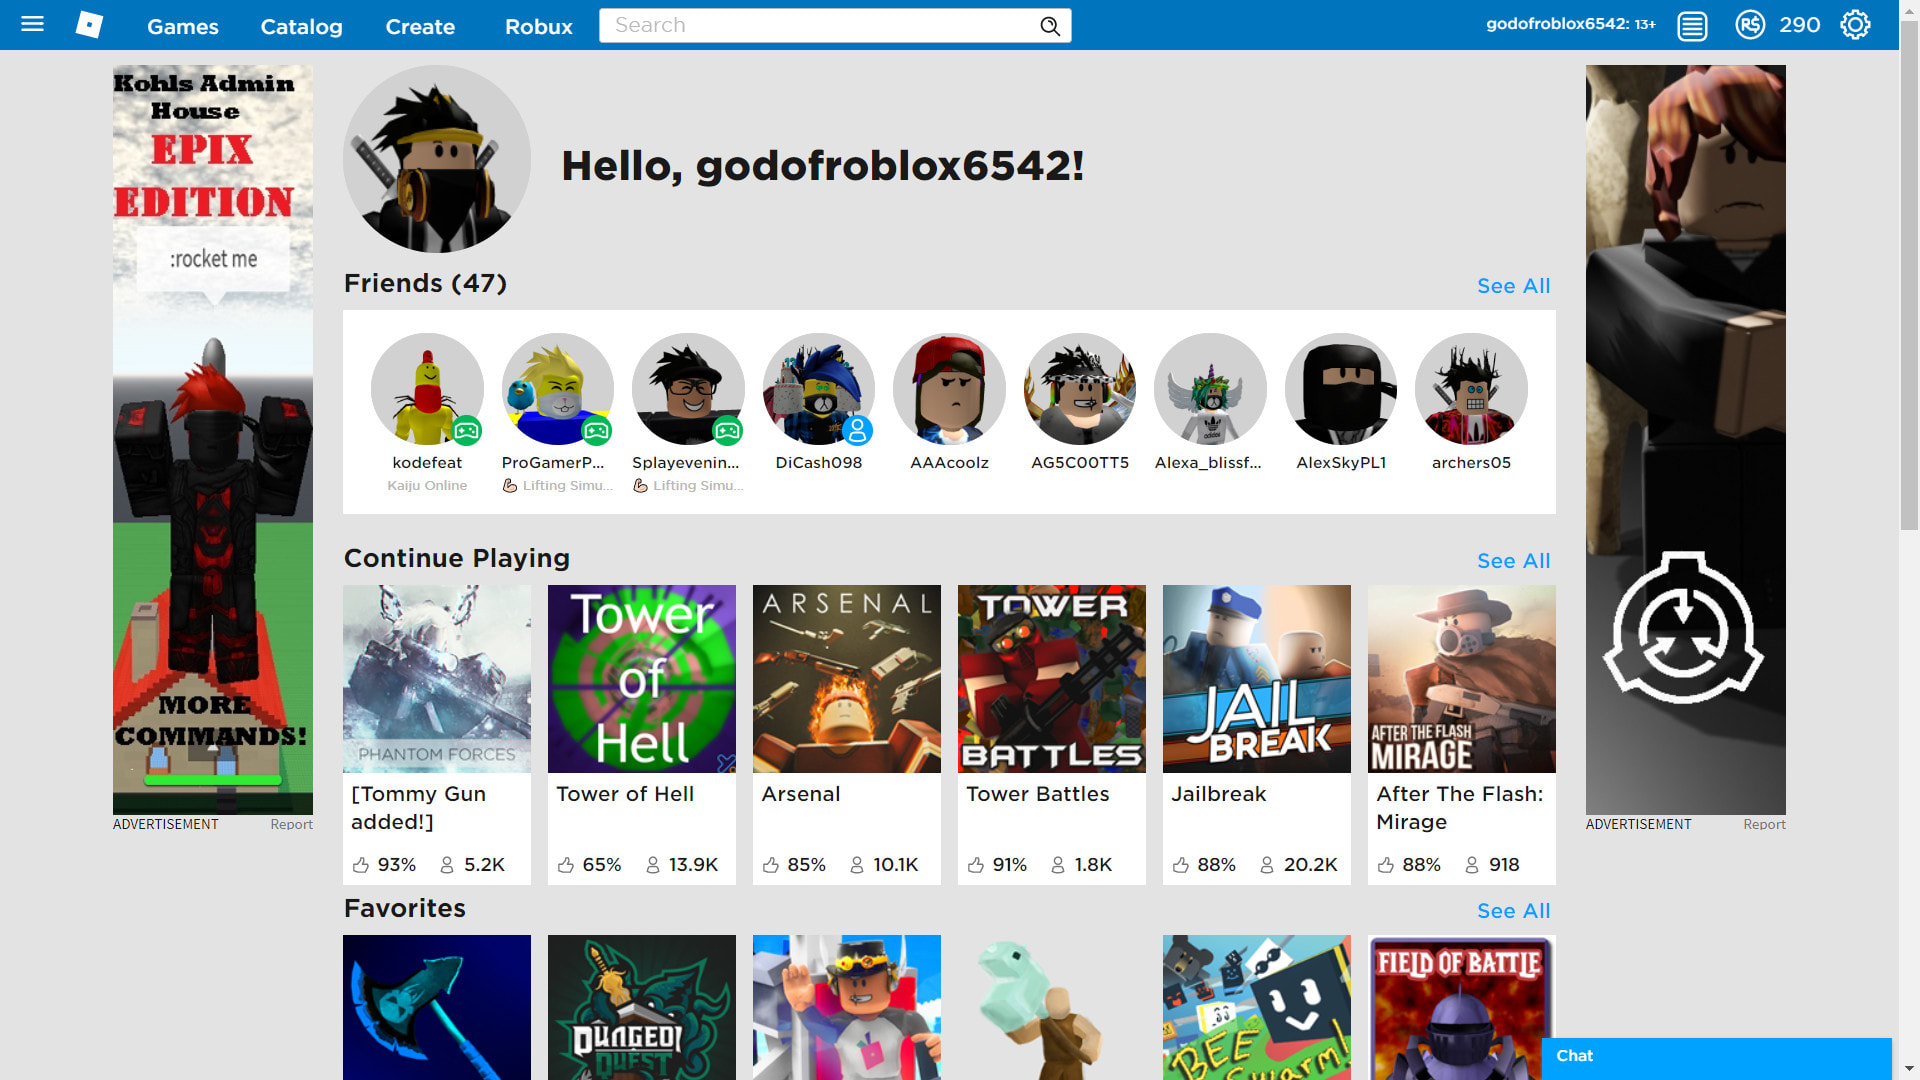 play roblox with you and we will play any game